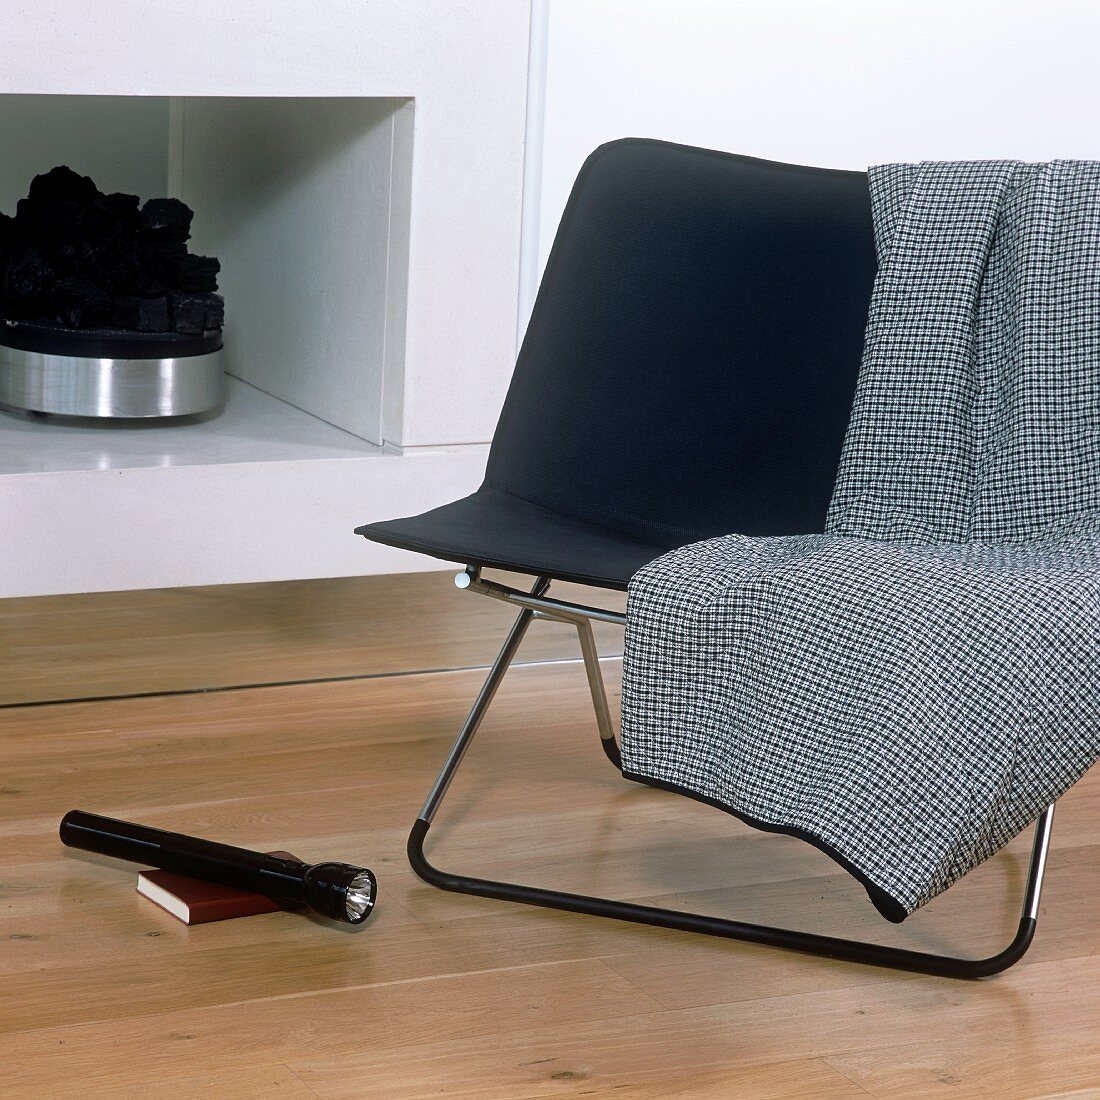 A chair with a stainless steel frame in front of a fireplace